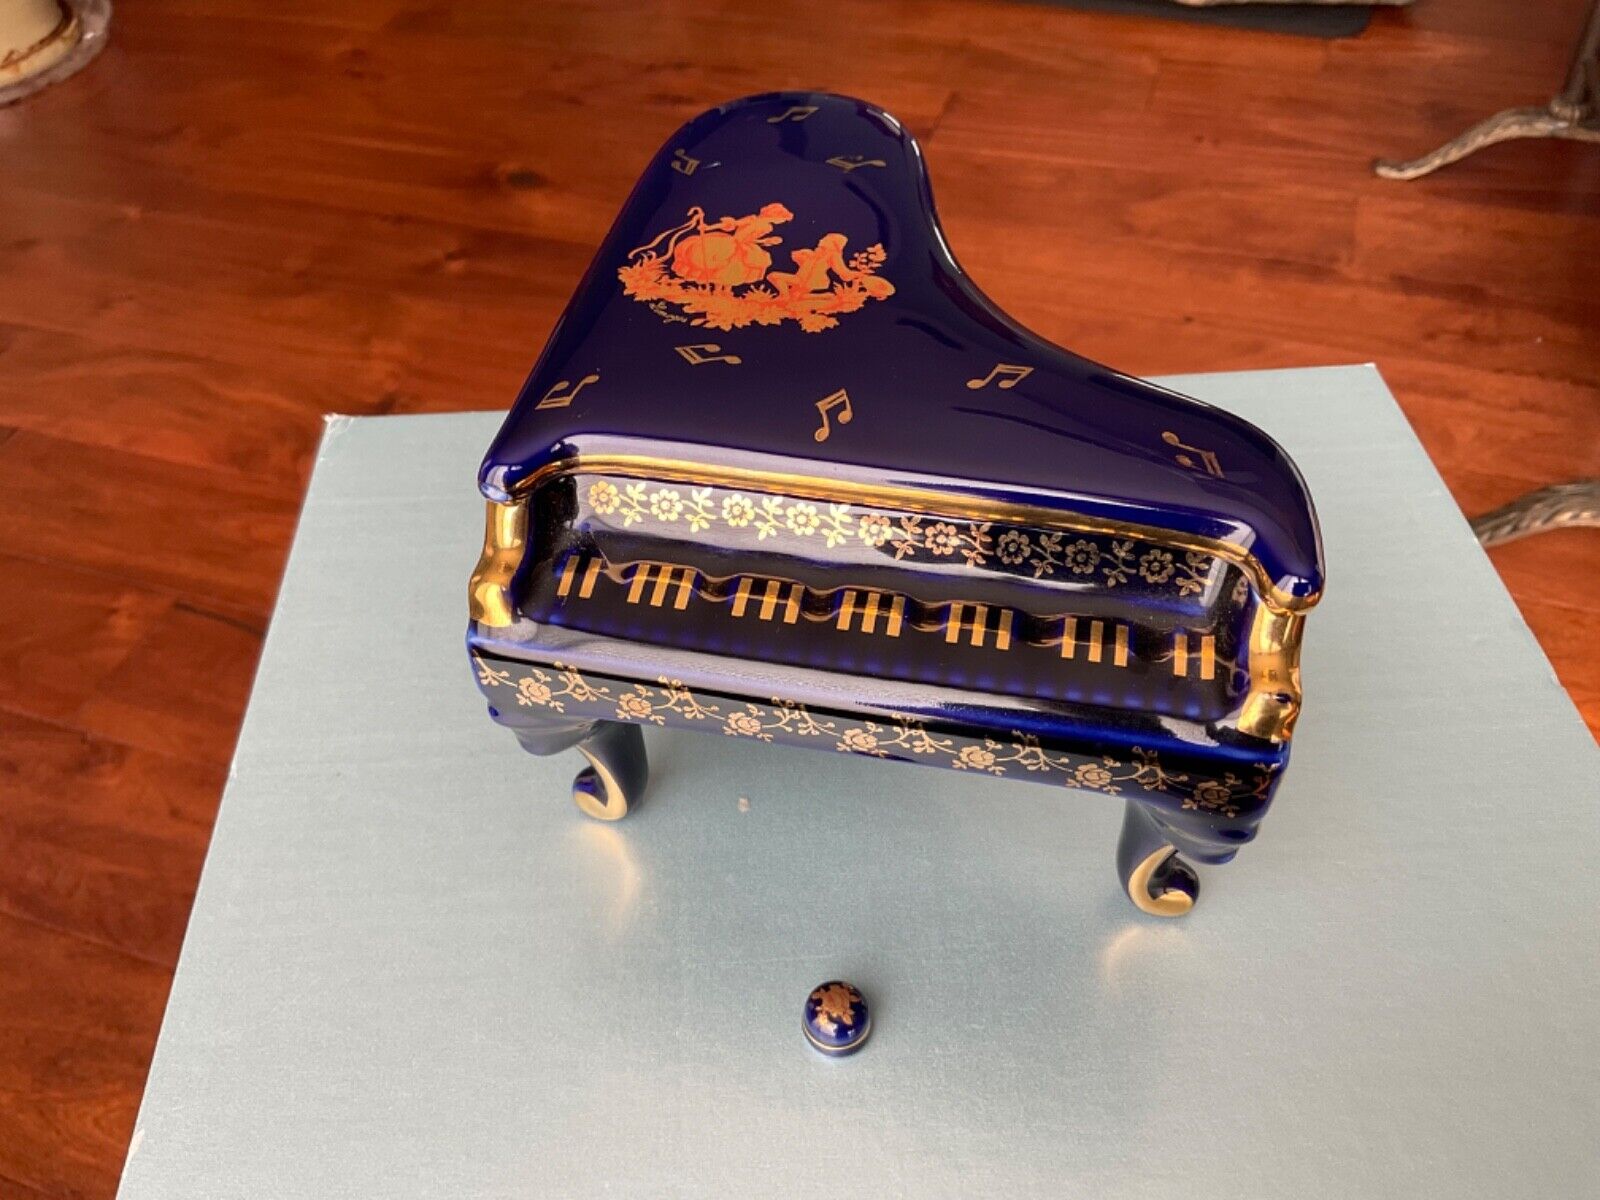 Rare Limoge France Colbolt Blue Grand Piano with Stool Trinket Box Lge New